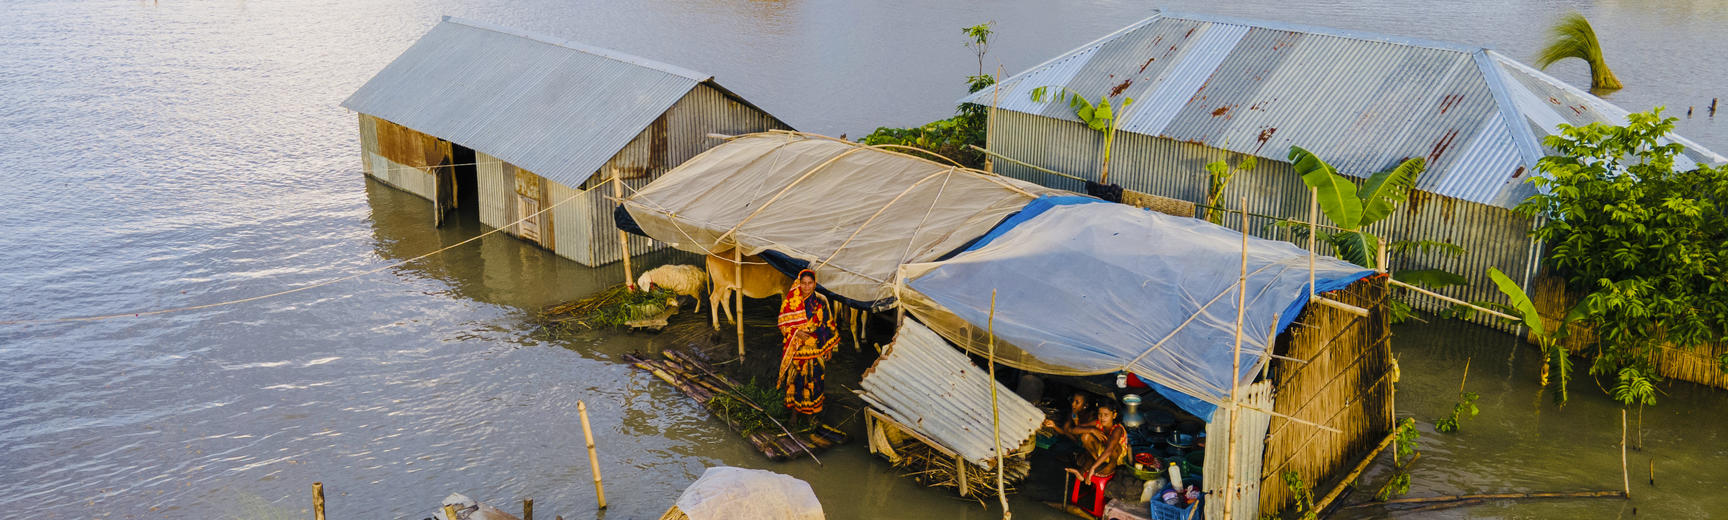 Image of houses stranded in flood water with people inside